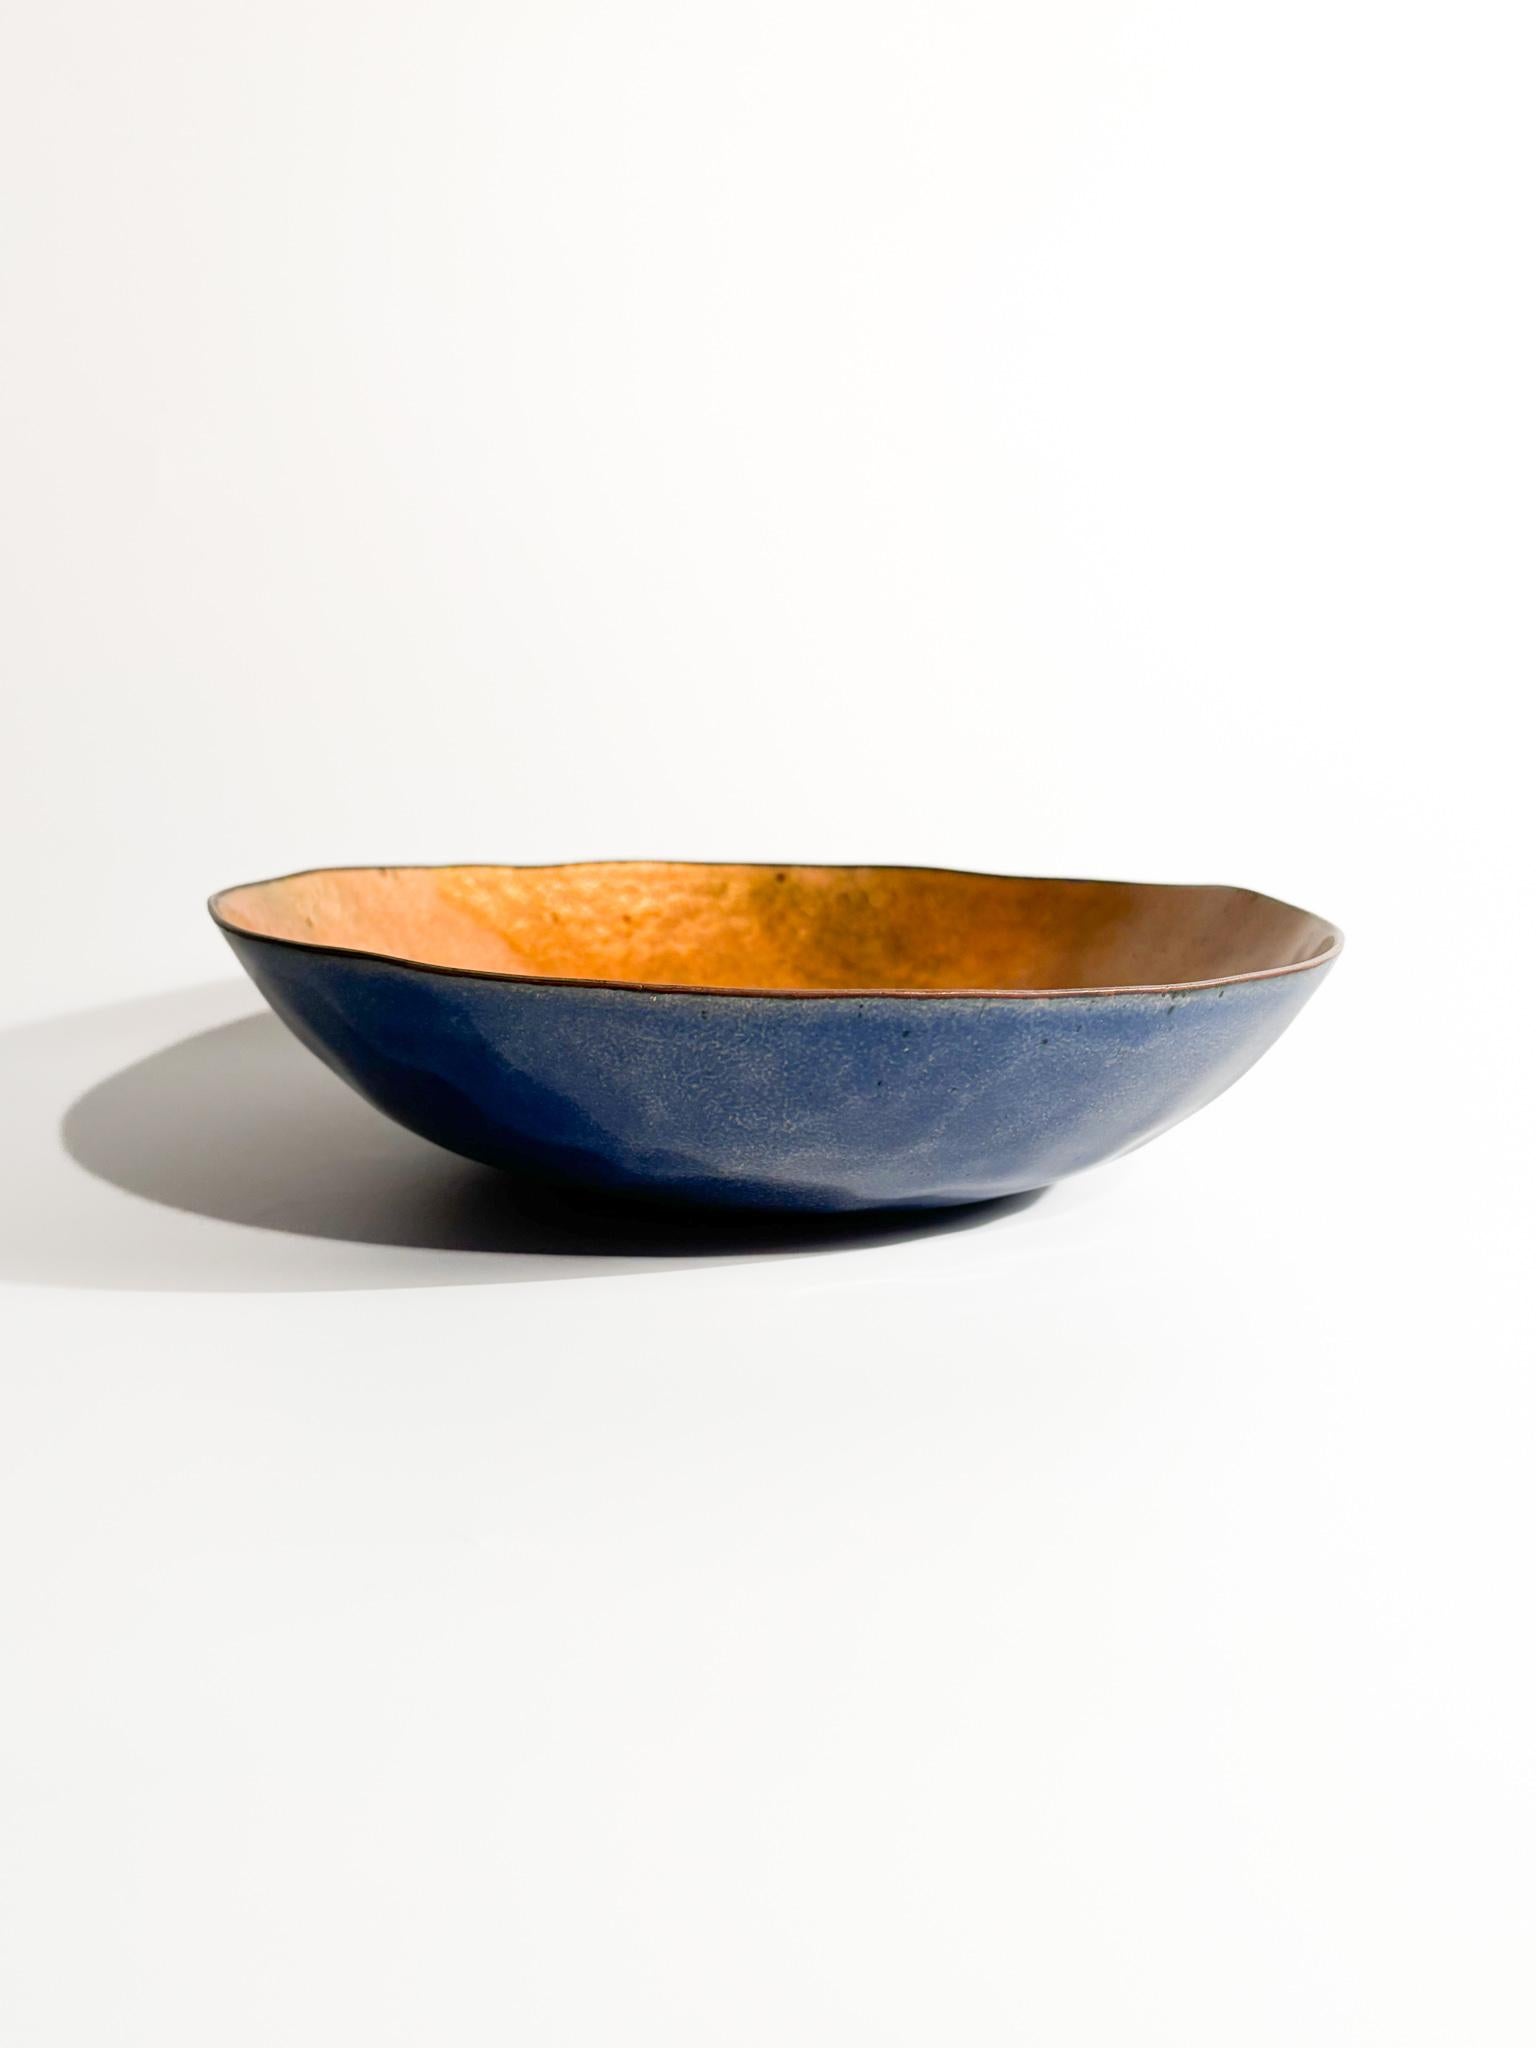 Mid-20th Century Enamelled Copper Bowl by Paolo De Poli from the 1950s